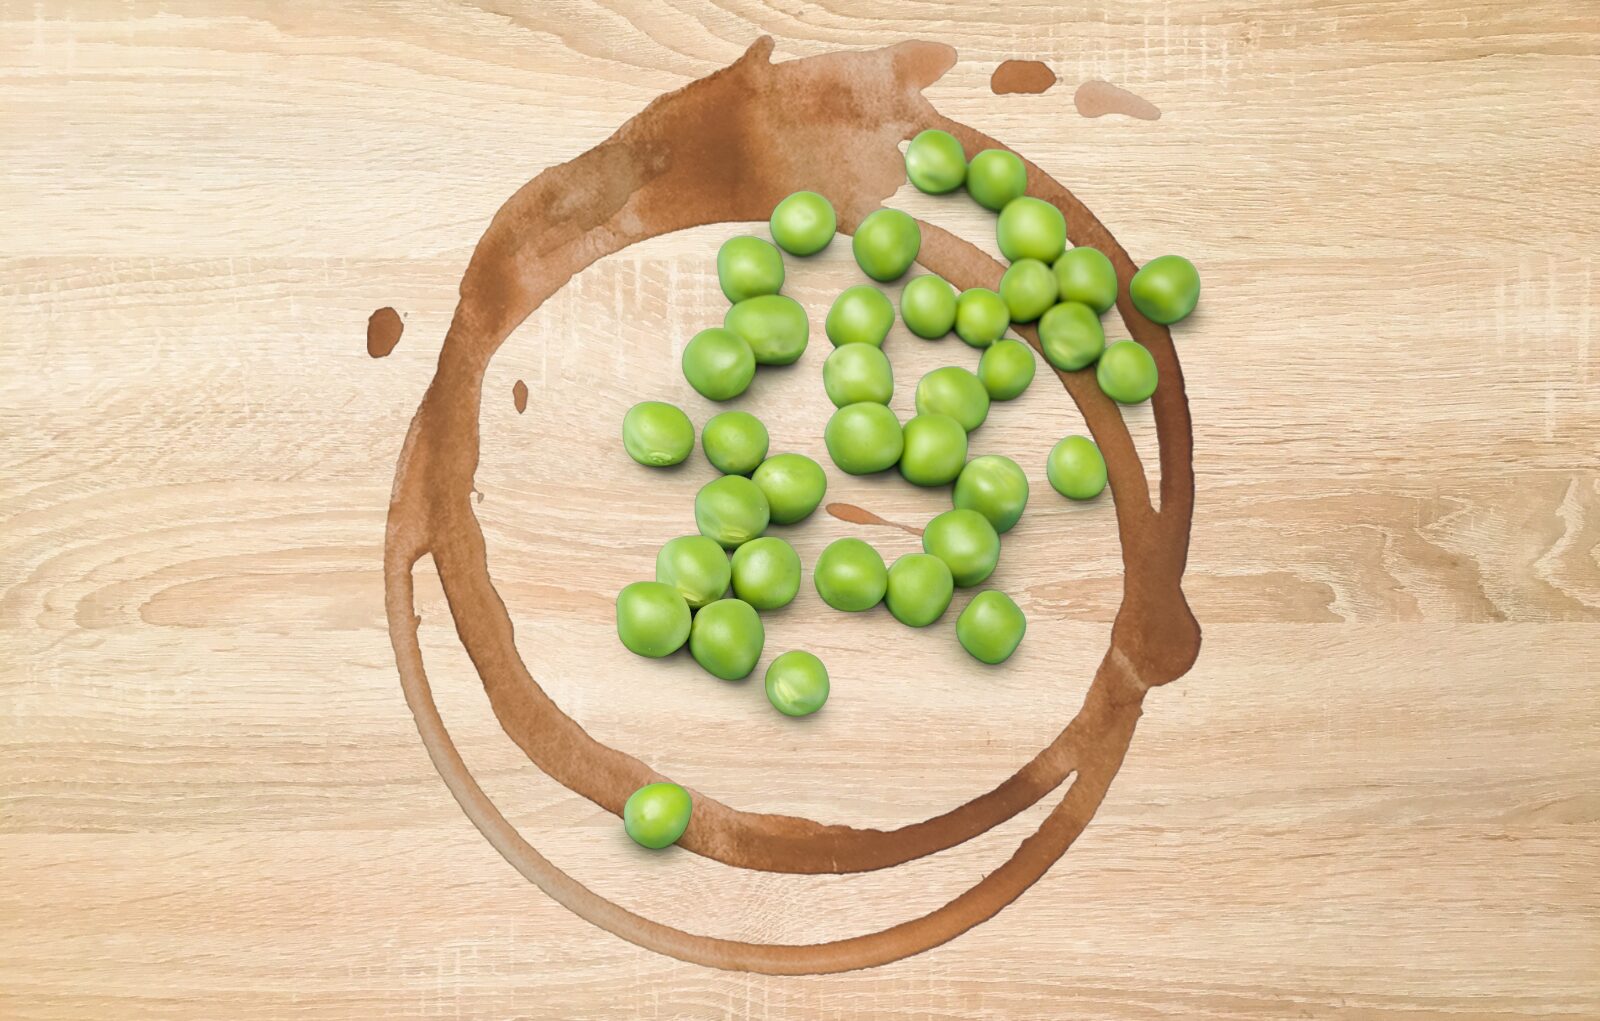 Wooden table surface covered in peas and coffee stains chasing a better life